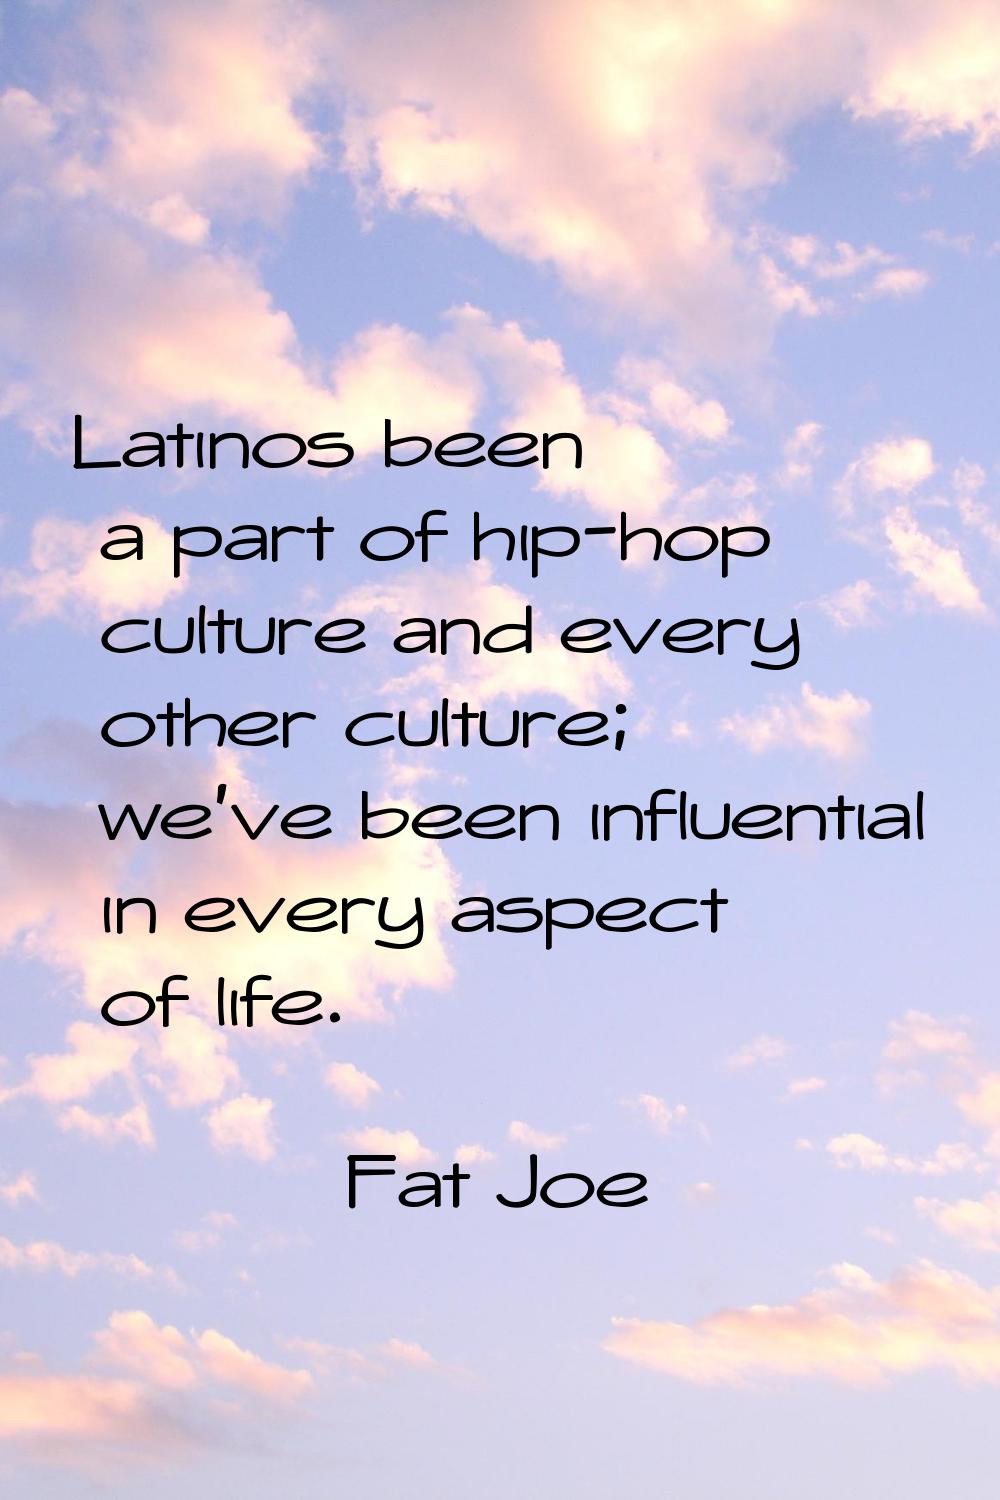 Latinos been a part of hip-hop culture and every other culture; we've been influential in every asp